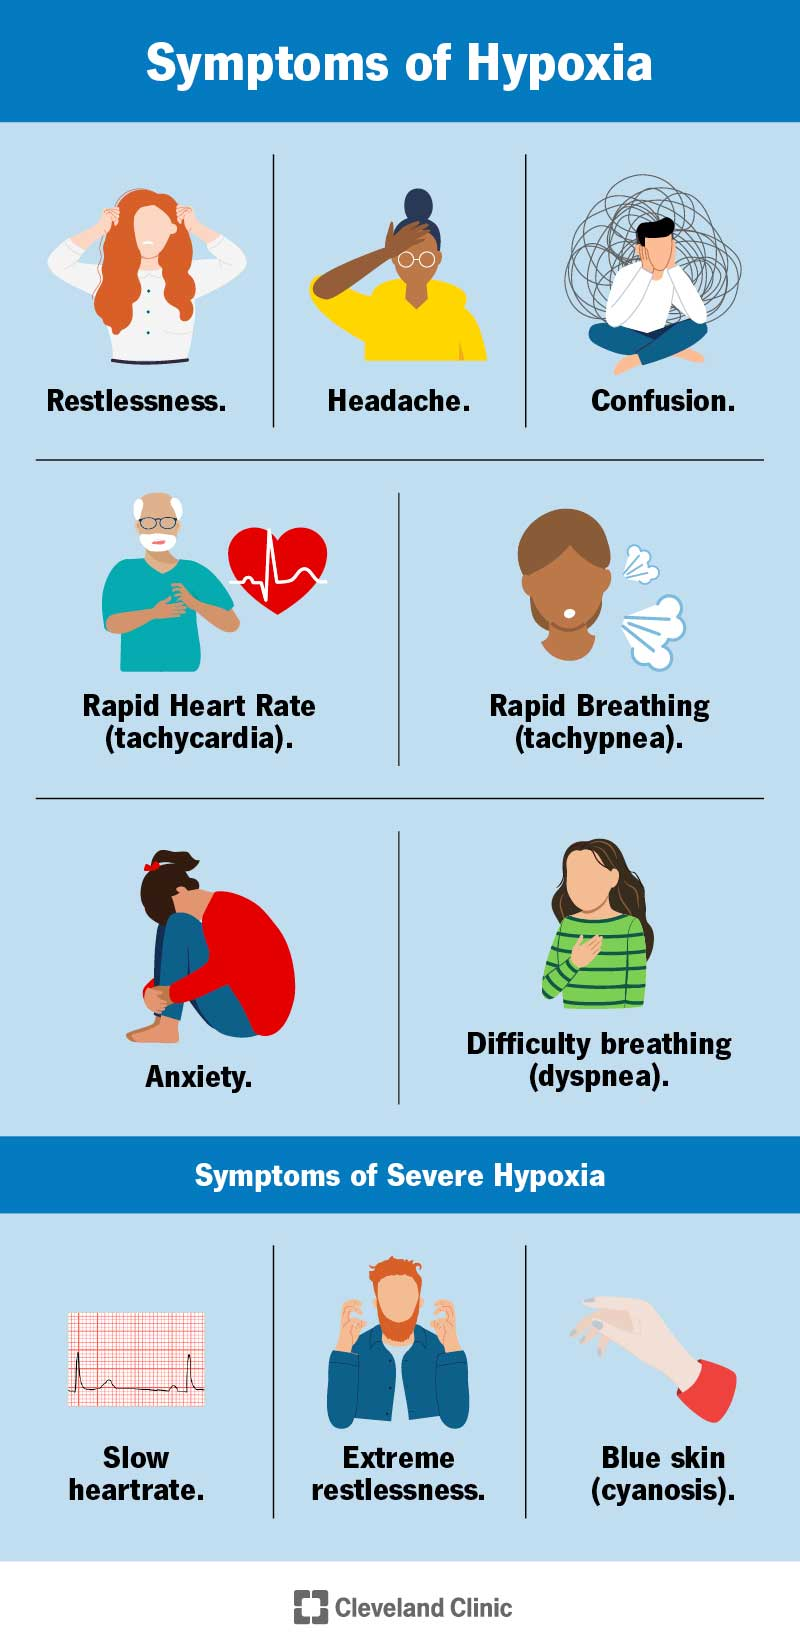 Symptoms of hypoxia include restlessness, headache, confusion, rapid heart rate, rapid breathing, difficulty breathing.